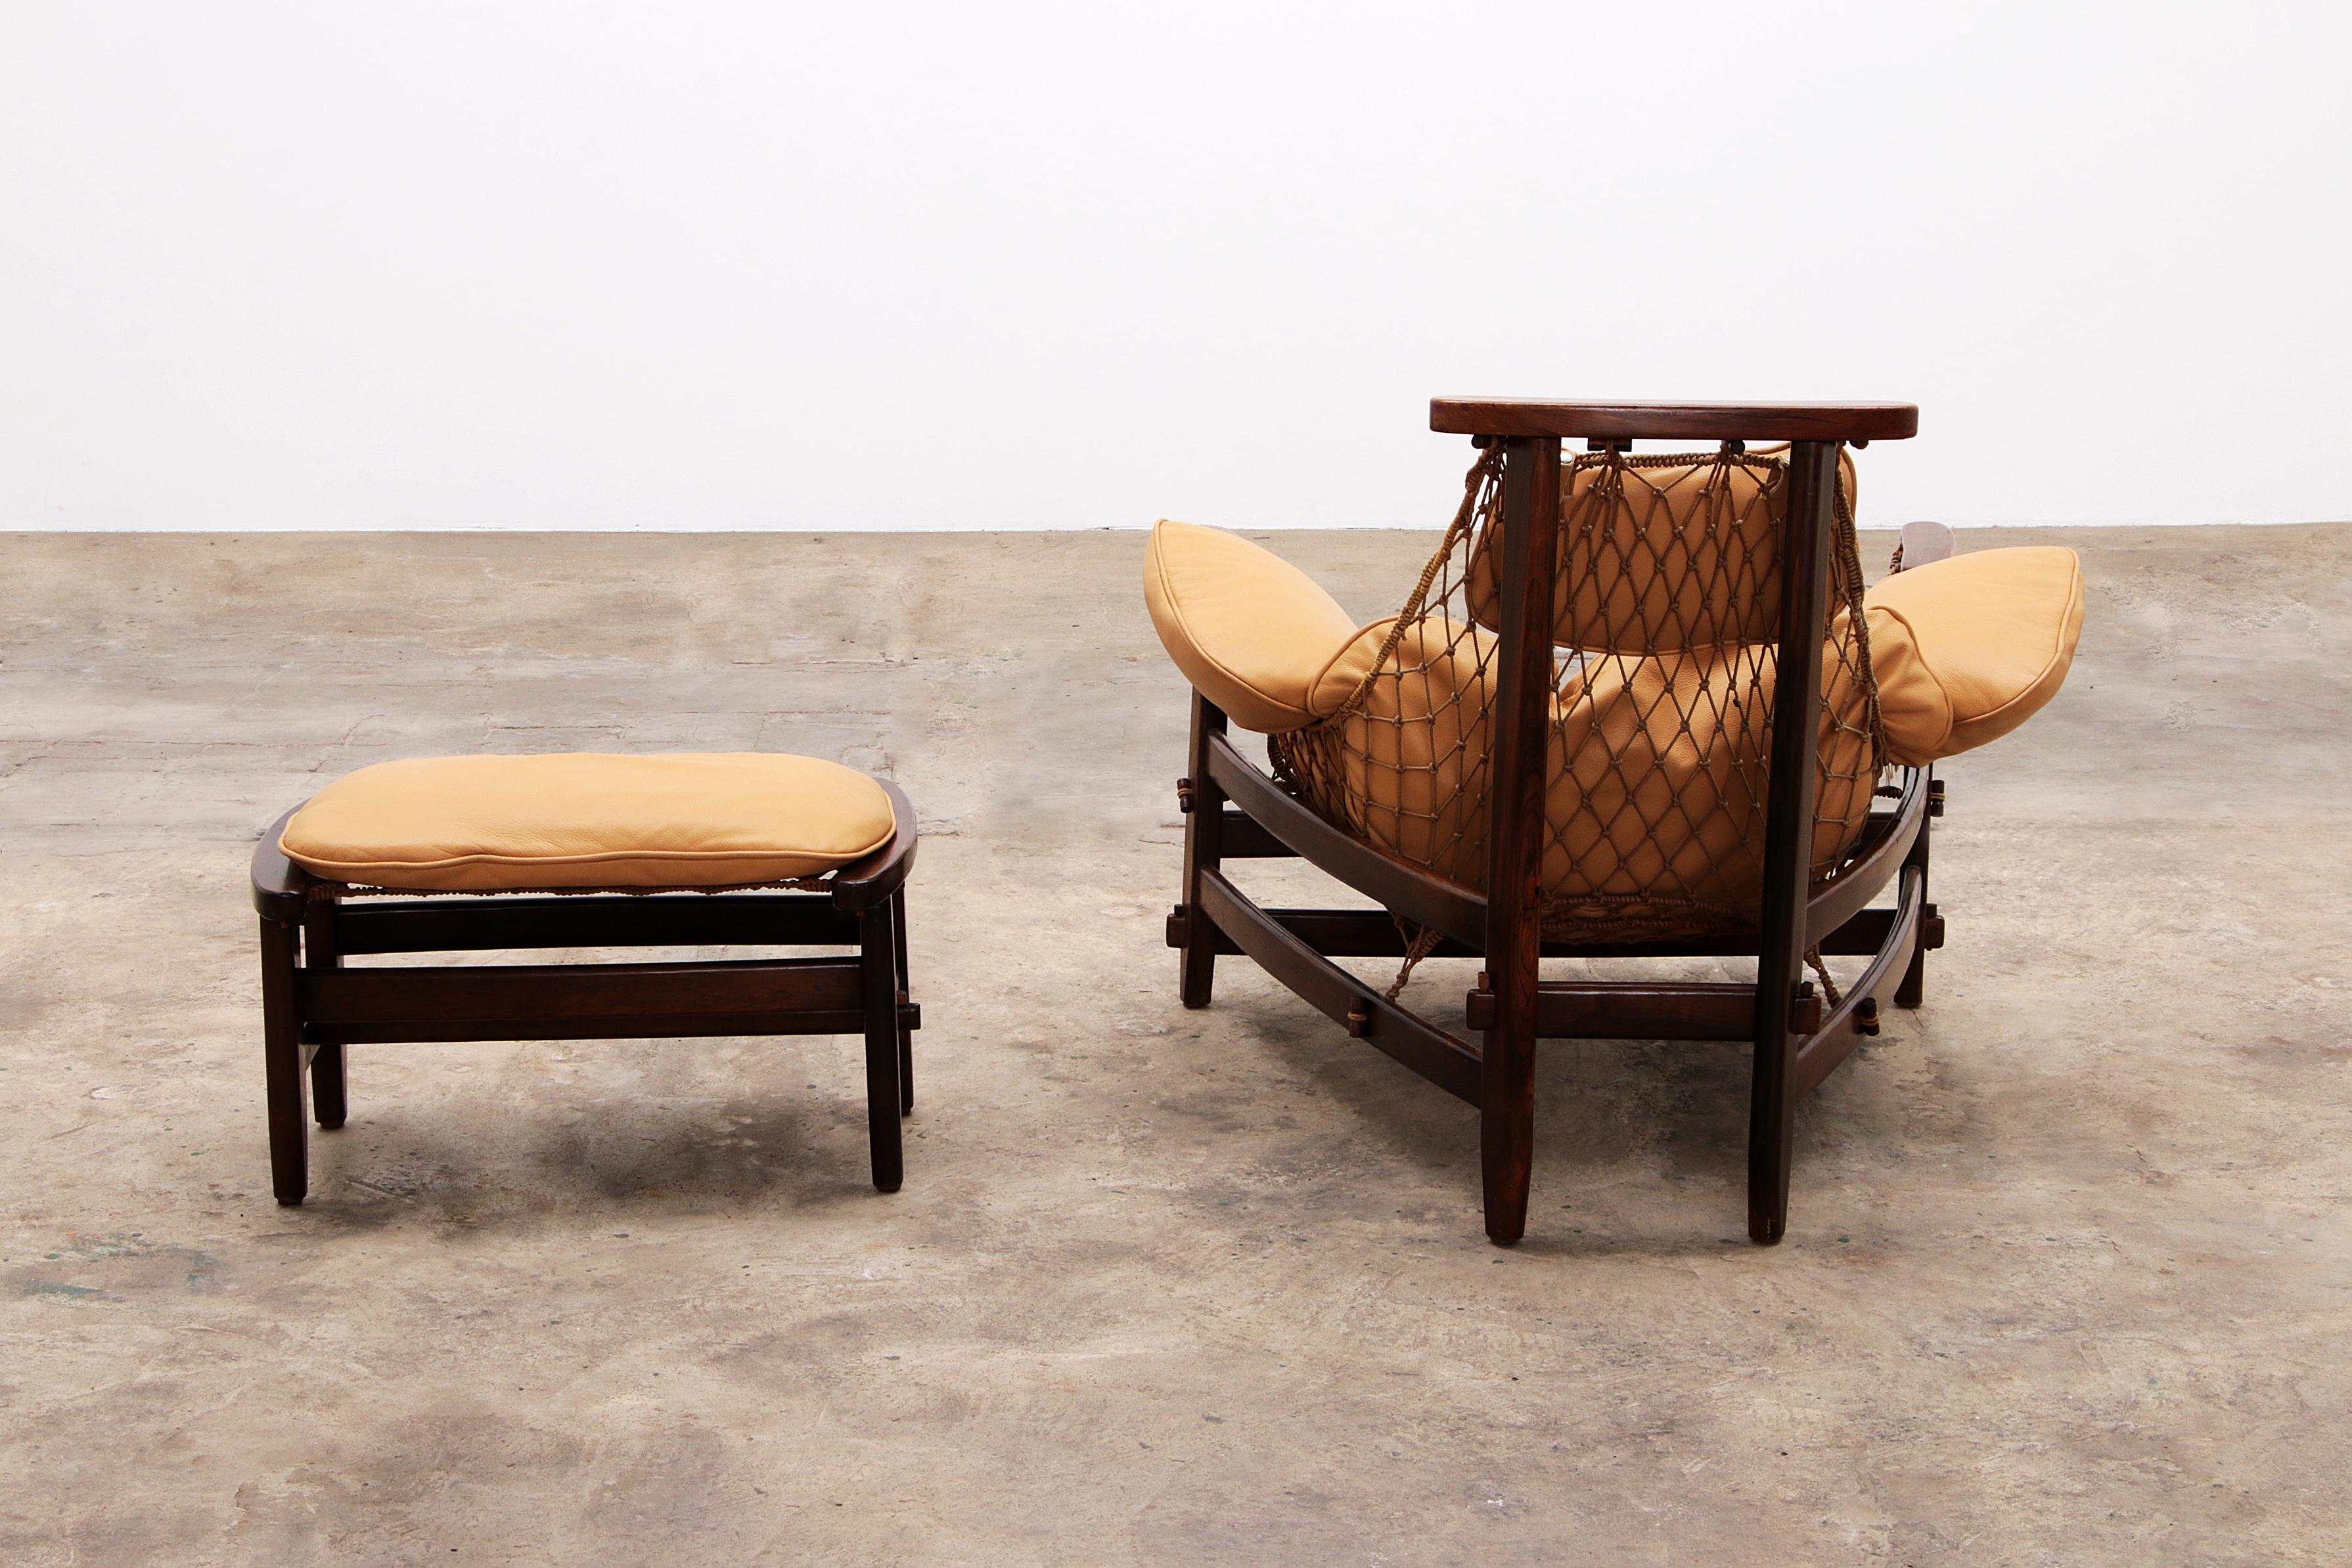 Mid-20th Century Jean Gillon 'Jangada' lounge chair and ottoman in tropical wood and leather.